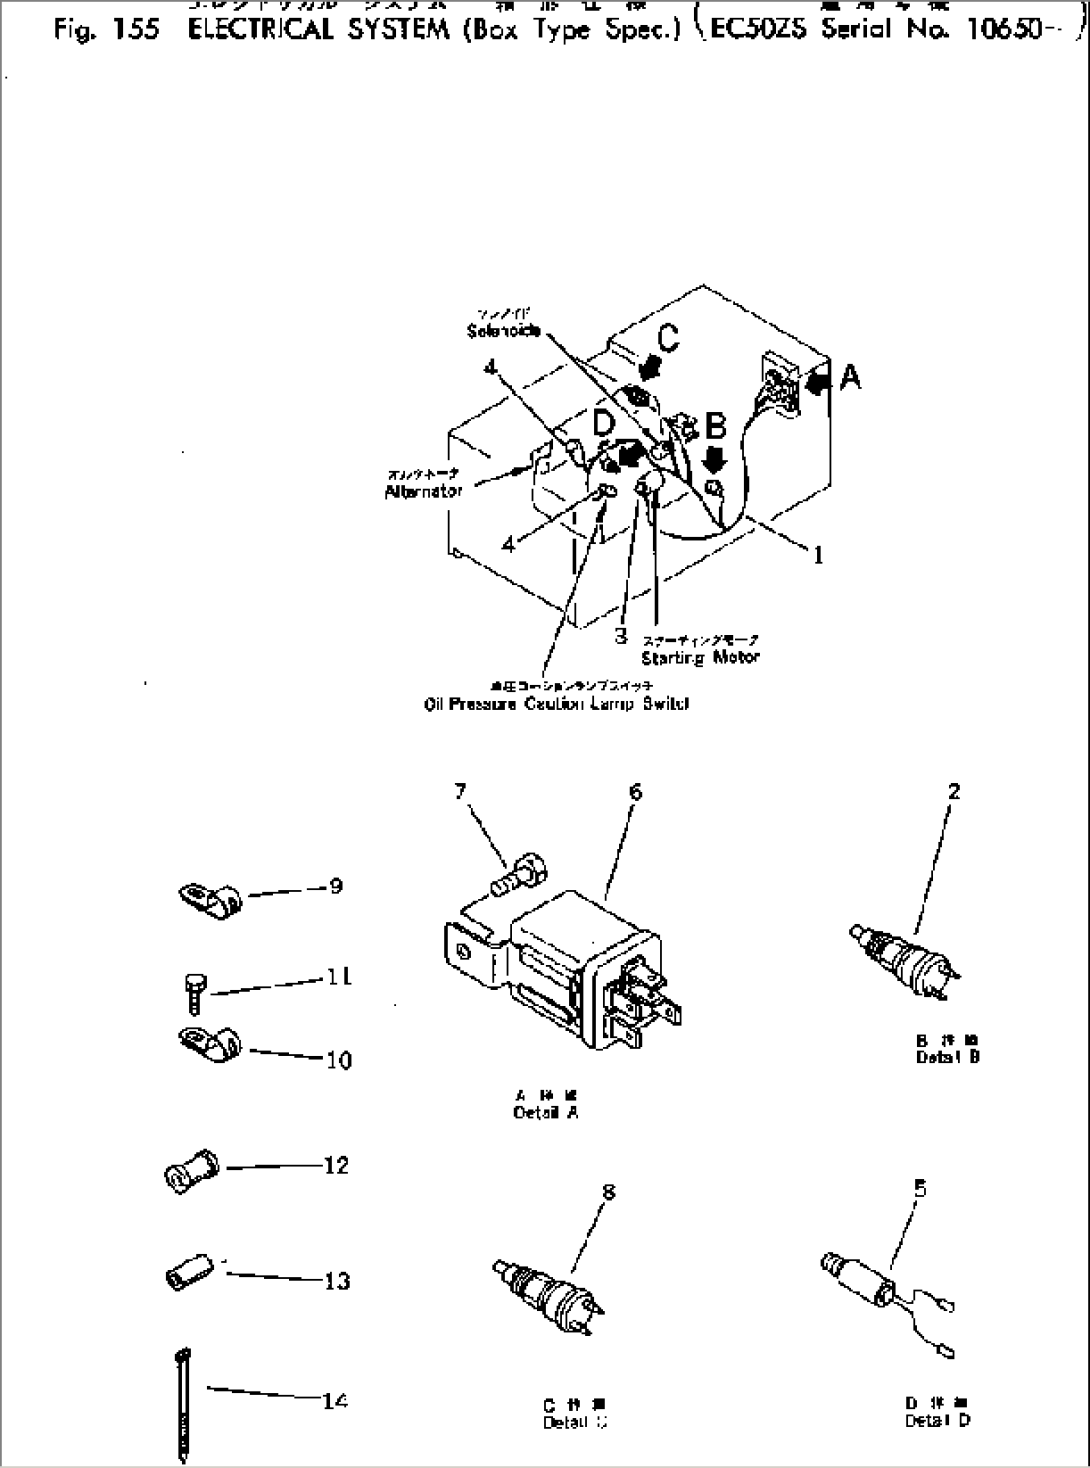 ELECTRICAL SYSTEM (BOX TYPE)(#10650-)